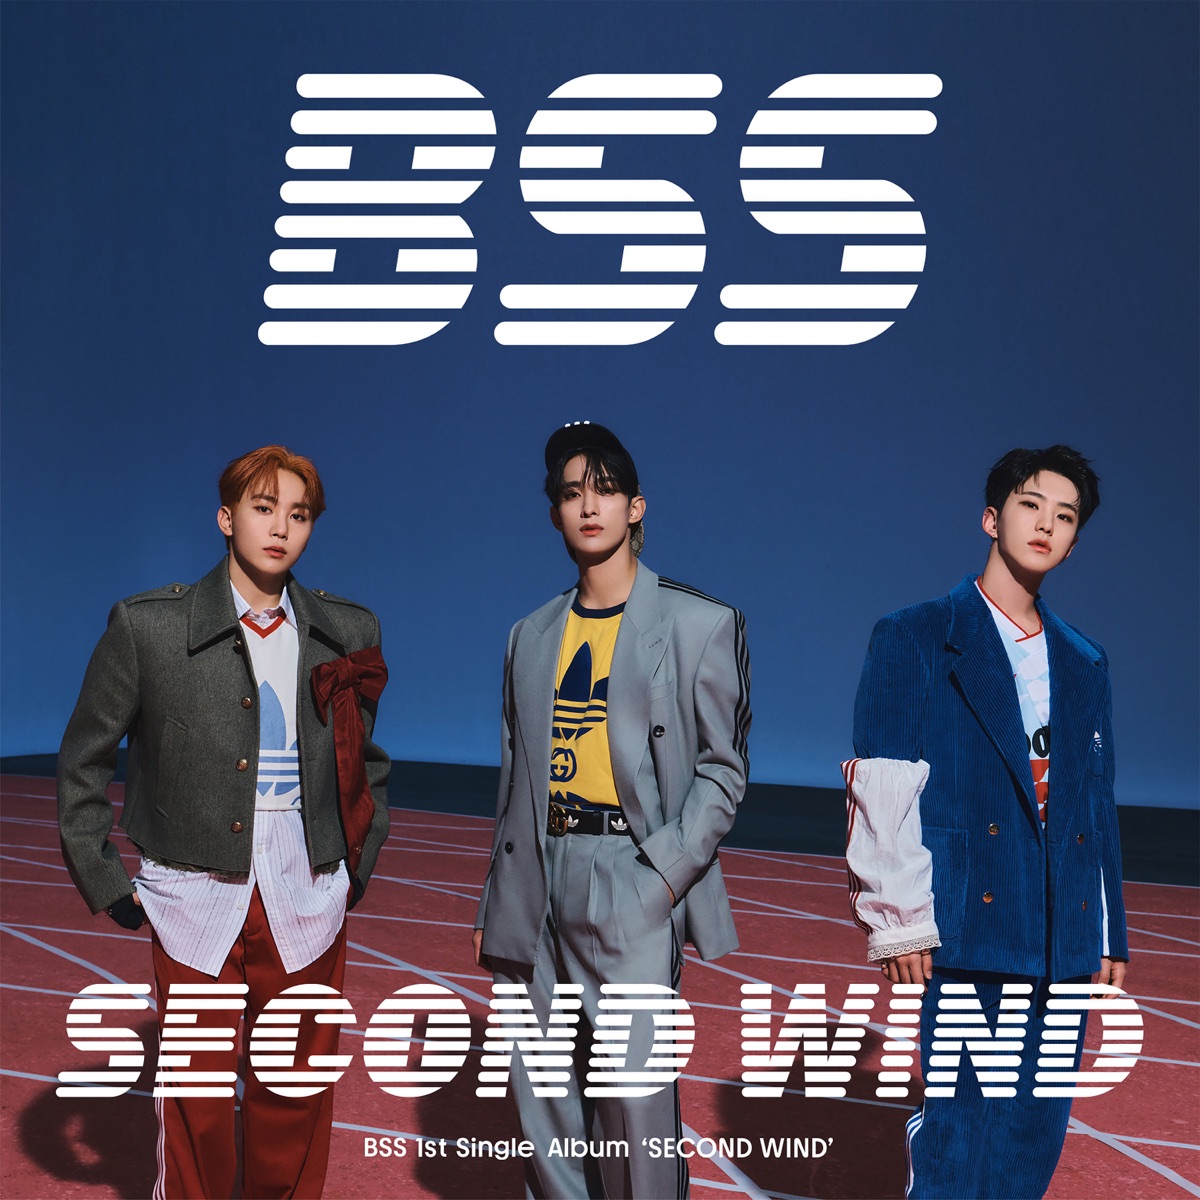 Cover art for『BSS (SEVENTEEN) - 7PM (feat. Peder Elias)』from the release『BSS 1st Single Album 'SECOND WIND'